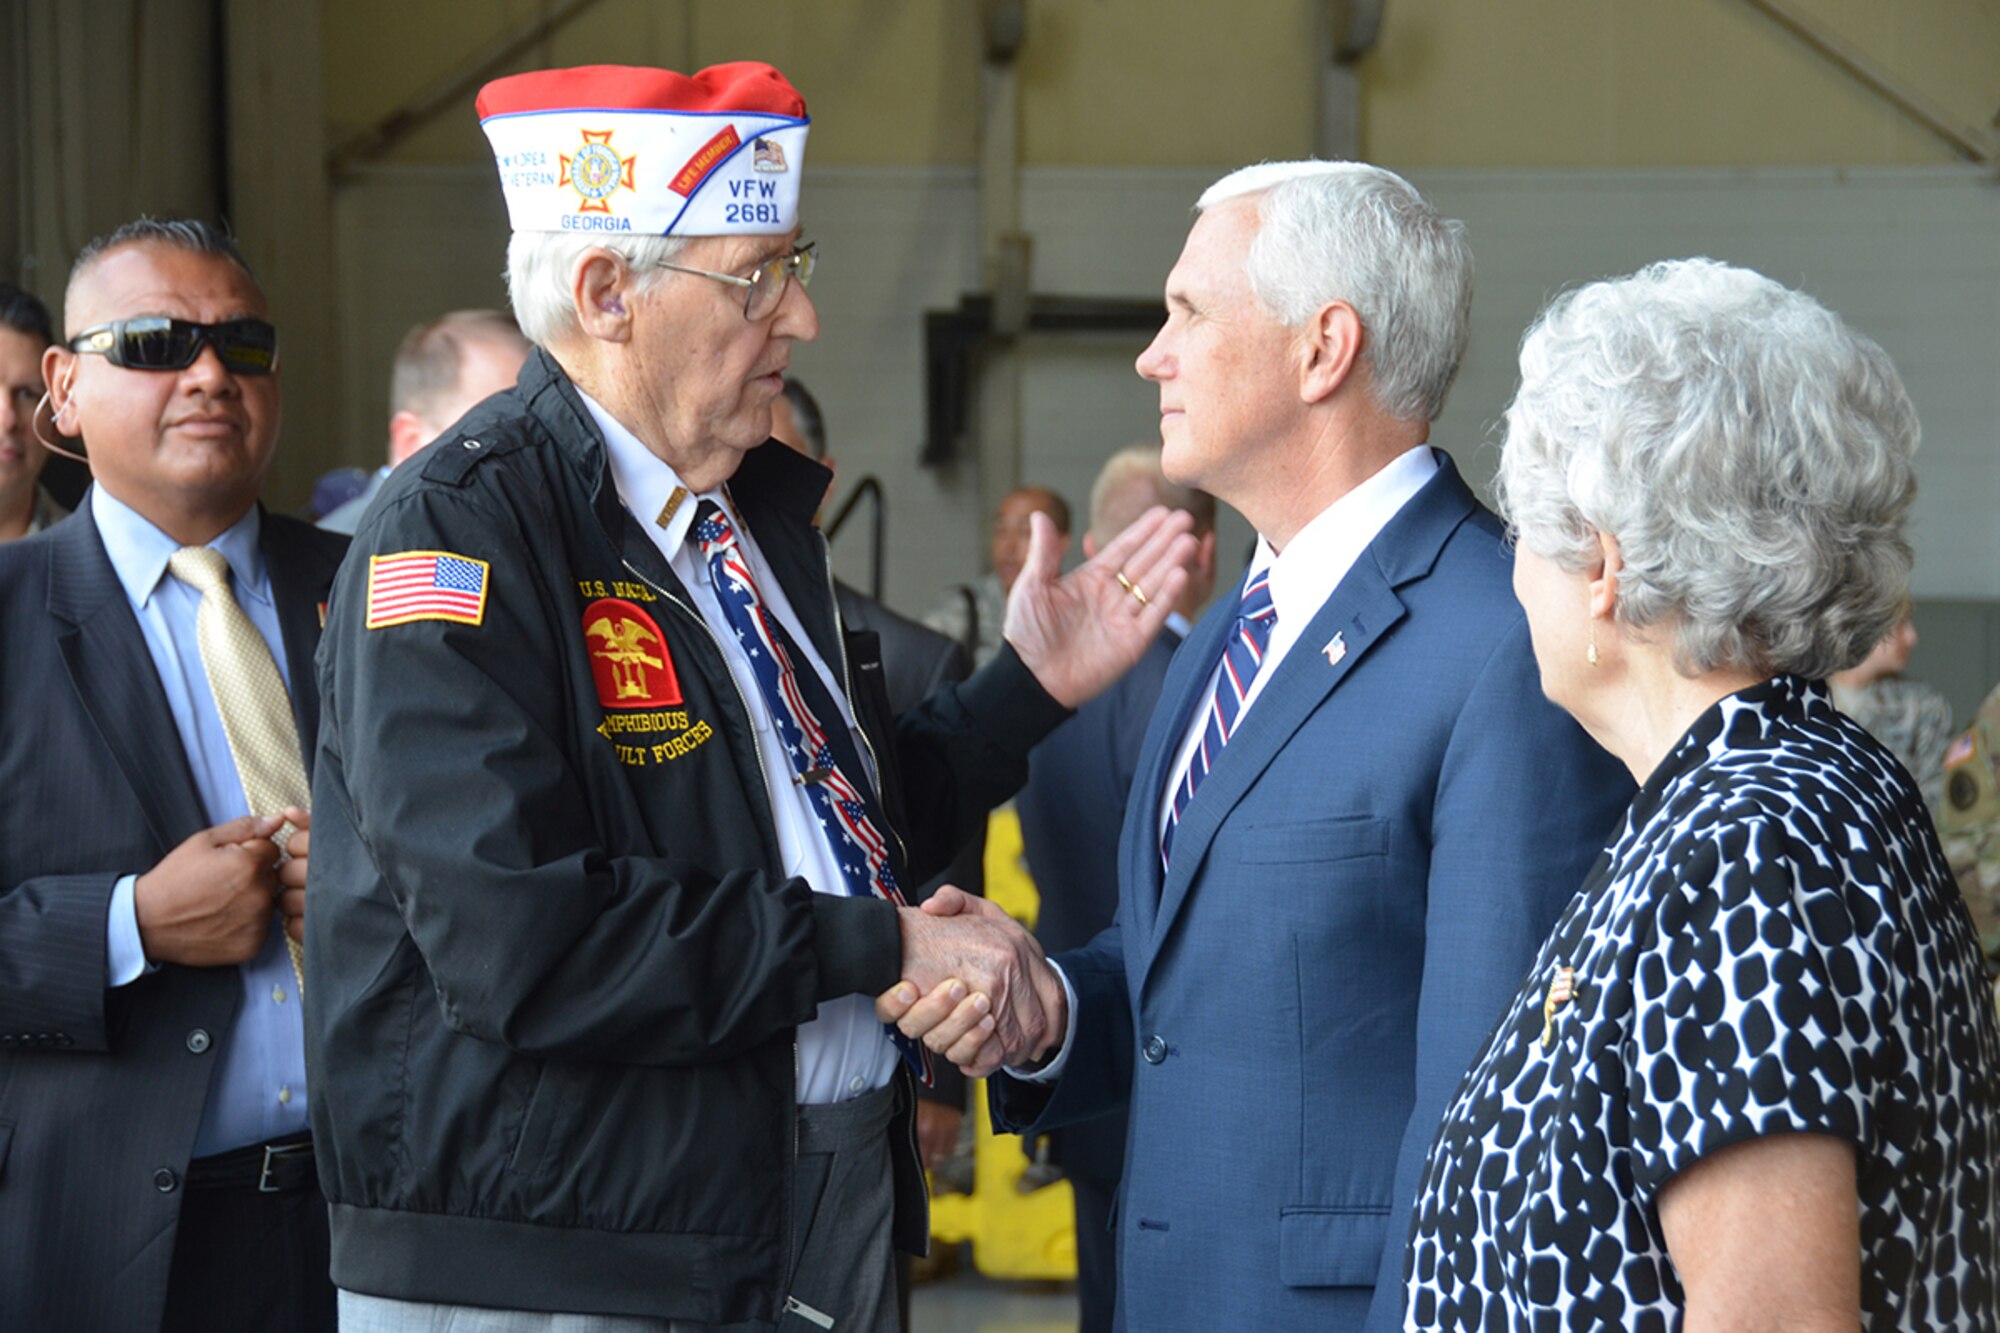 Vice President Mike Pence meets U.S. Navy Veteran Alan Hall and his wife Buena. Hall joined the Navy on his 17th birthday in 1943, and served in the U.S. Naval Amphibious Assault Forces during World War II and on the U.S.S. Brown DD 546 during the Korean War. (U.S. Air Force photo/Tech. Sgt. Kelly Goonan)